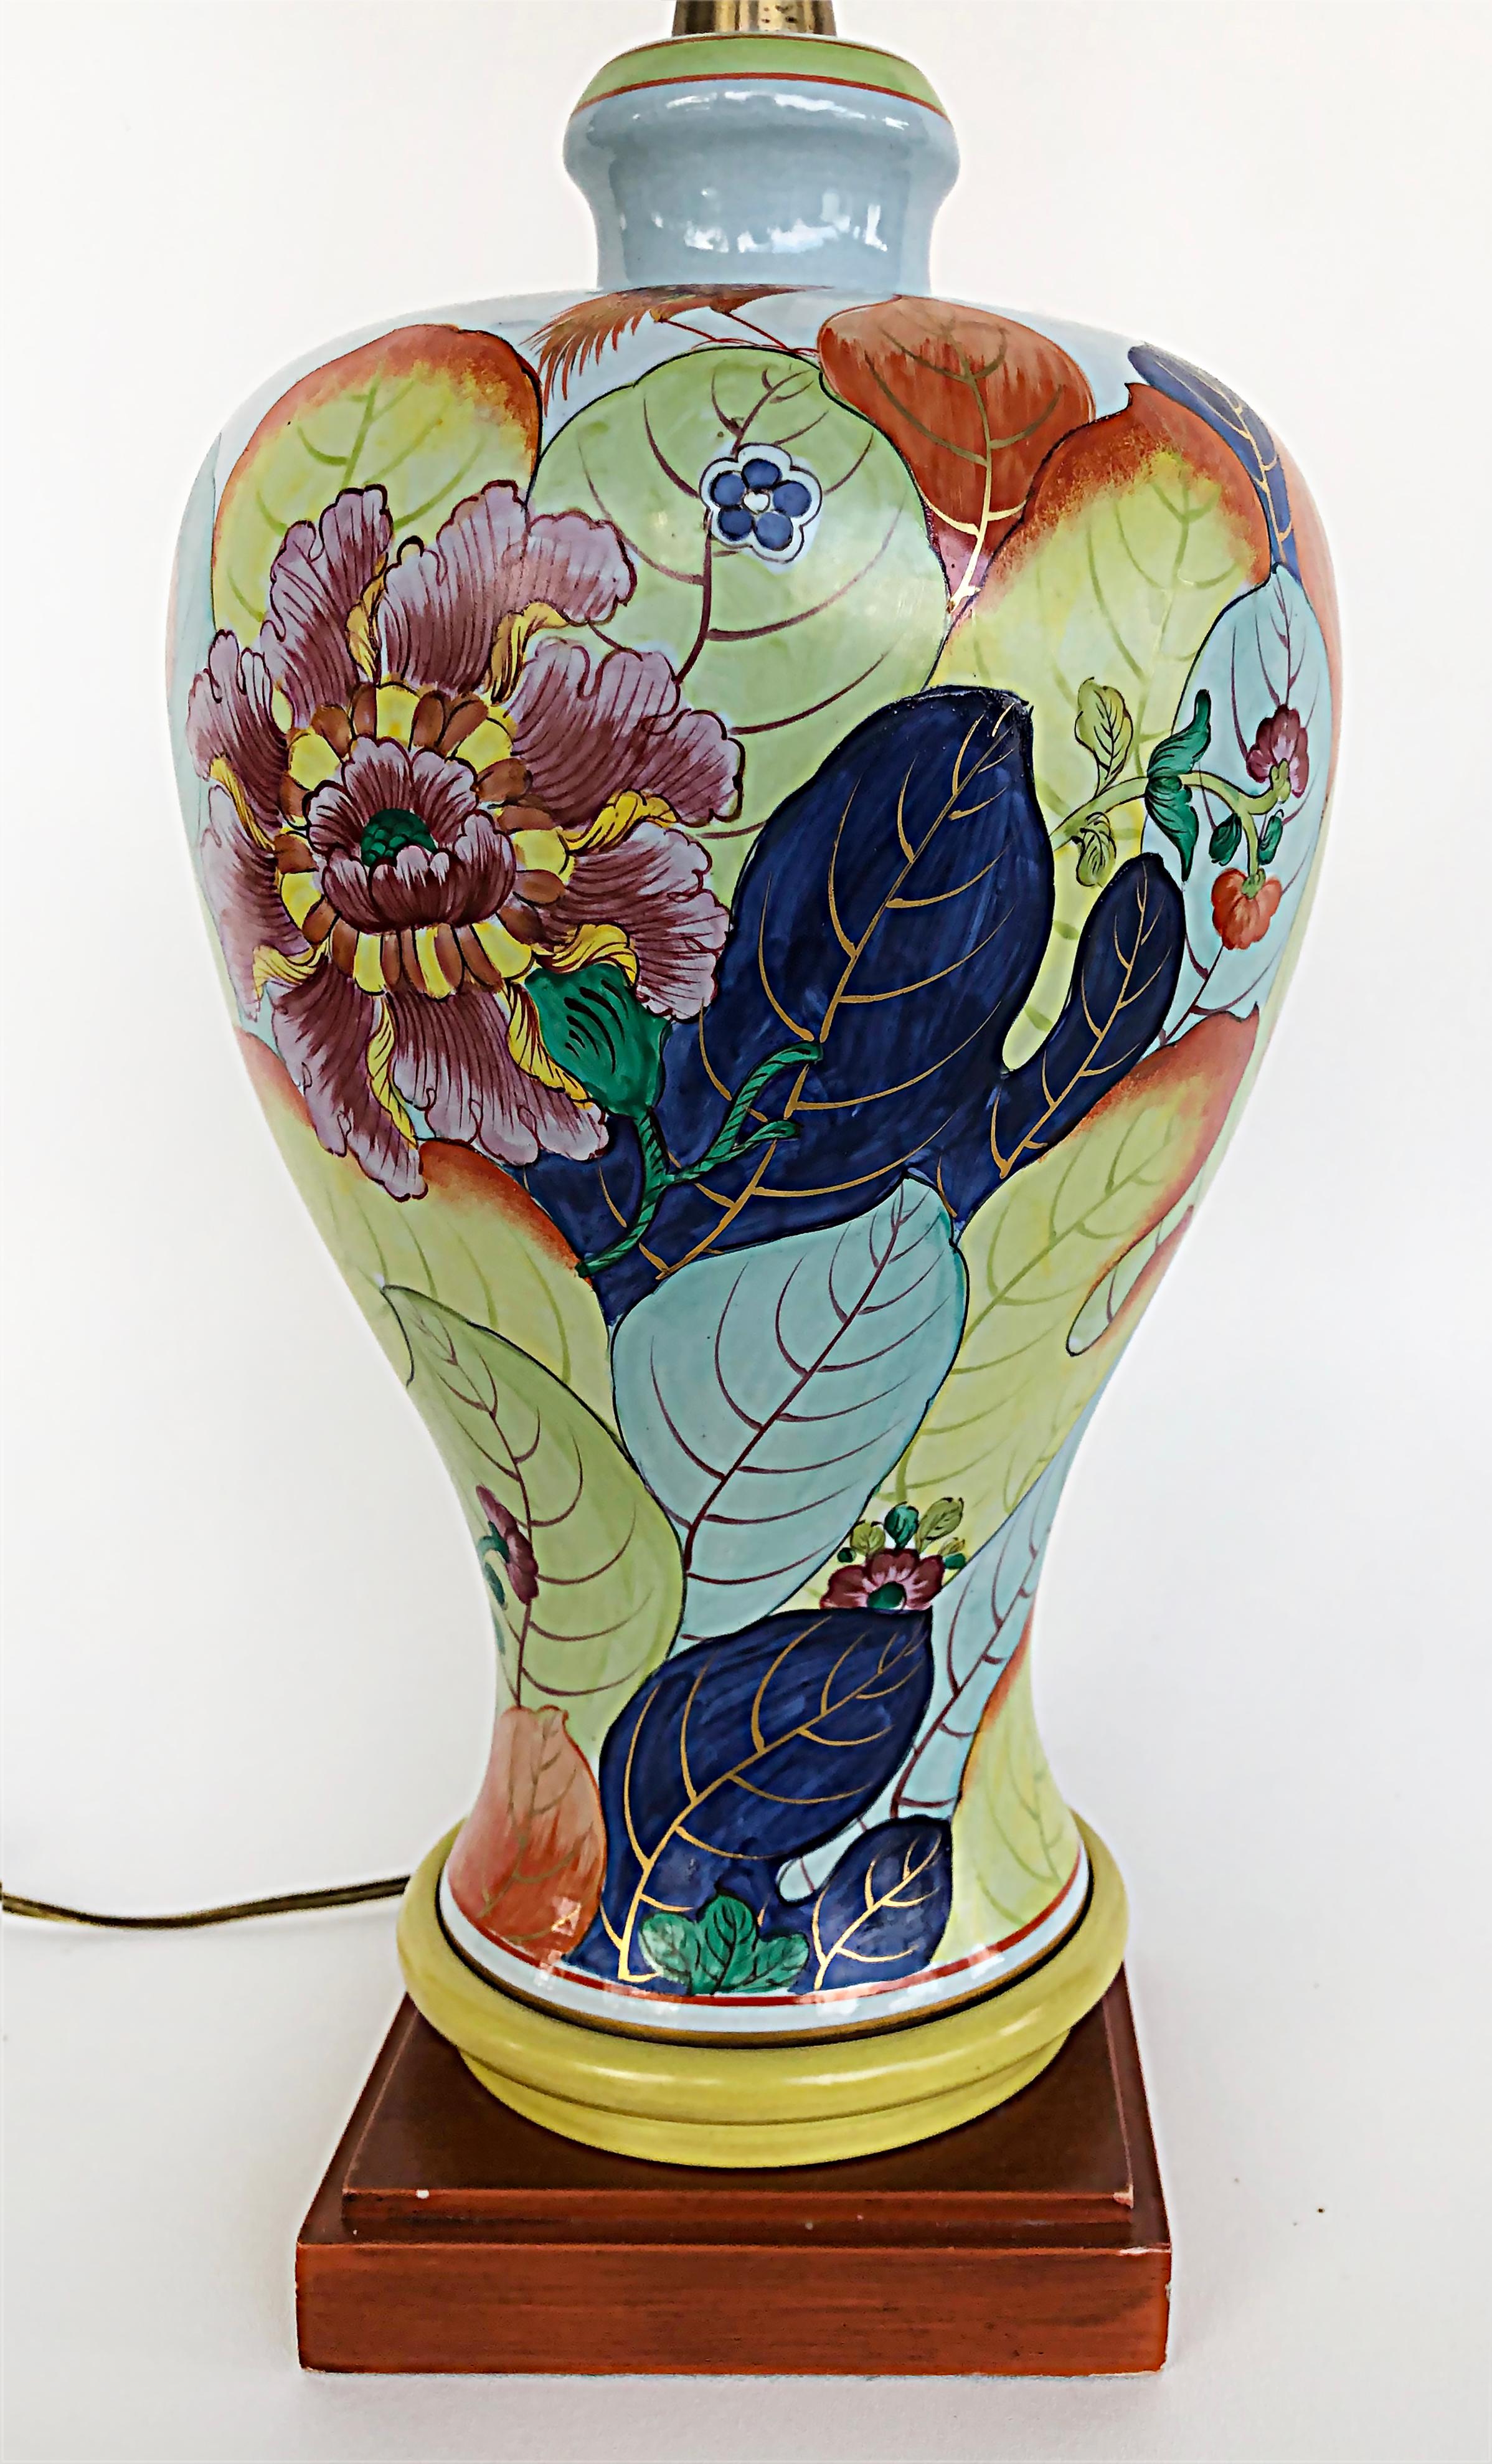 Marbro porcelain tobacco leaf and pheasant table lamp.

Offered for sale is an elegant Hollywood Regency porcelain table lamp by the Marbro Lamp Co. of Los Angeles, CA. This single hand-painted lamp depicts colorful tobacco leaves and a pheasant